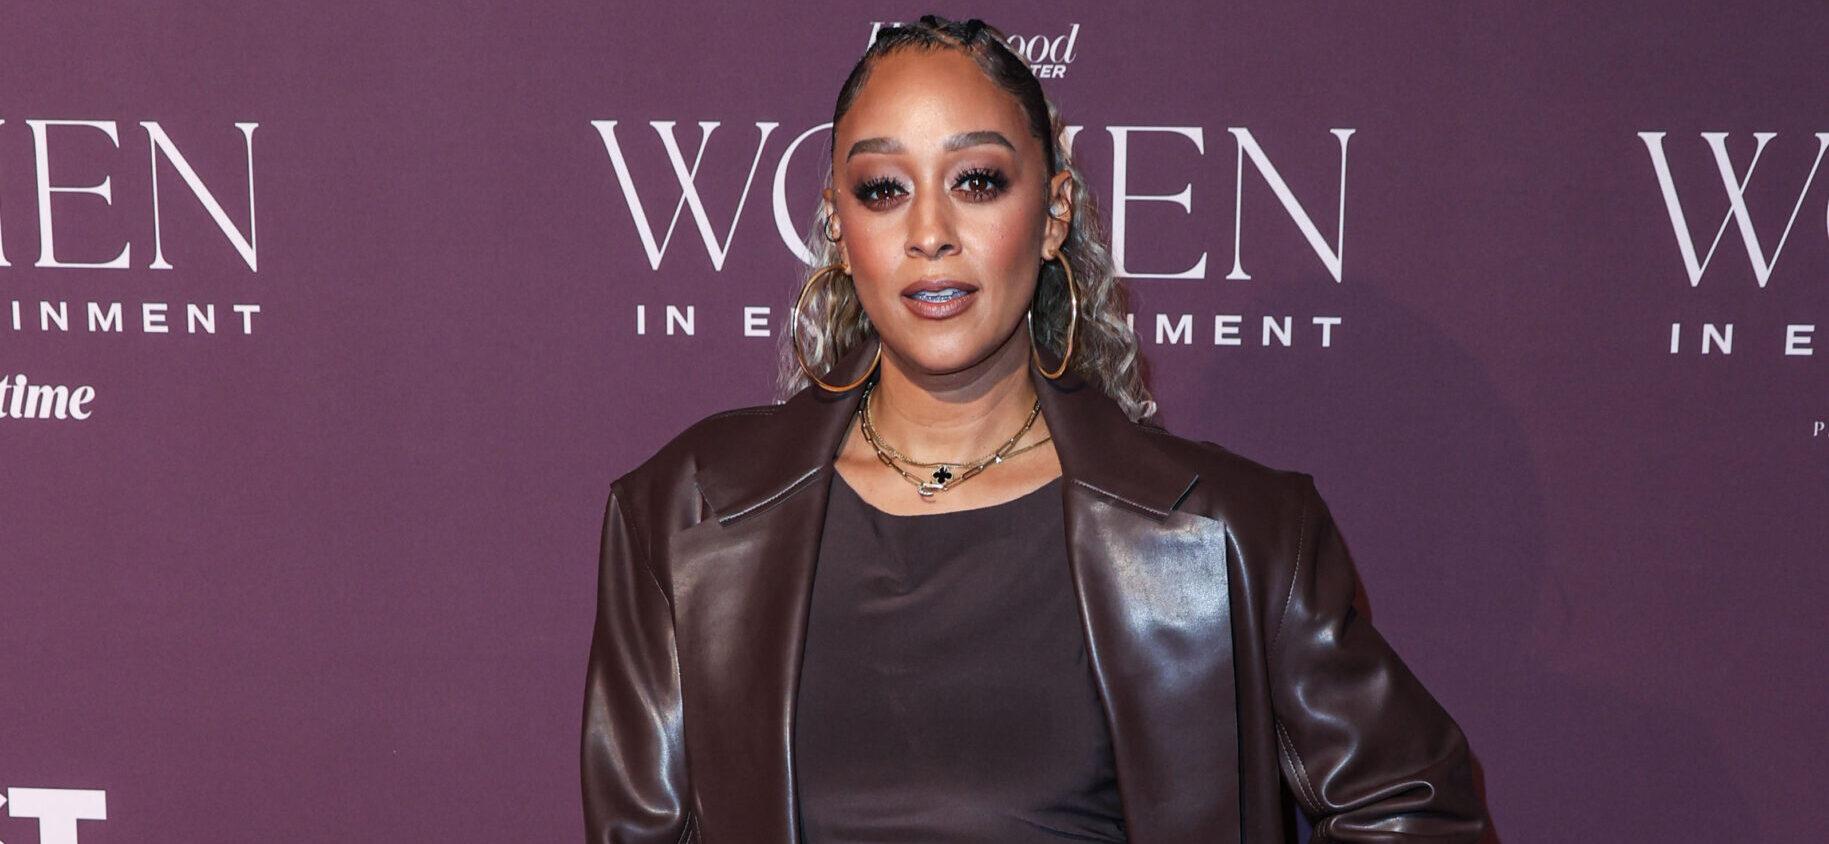 Tia Mowry Shares Confession And How She’s Shifted To A New Perspective